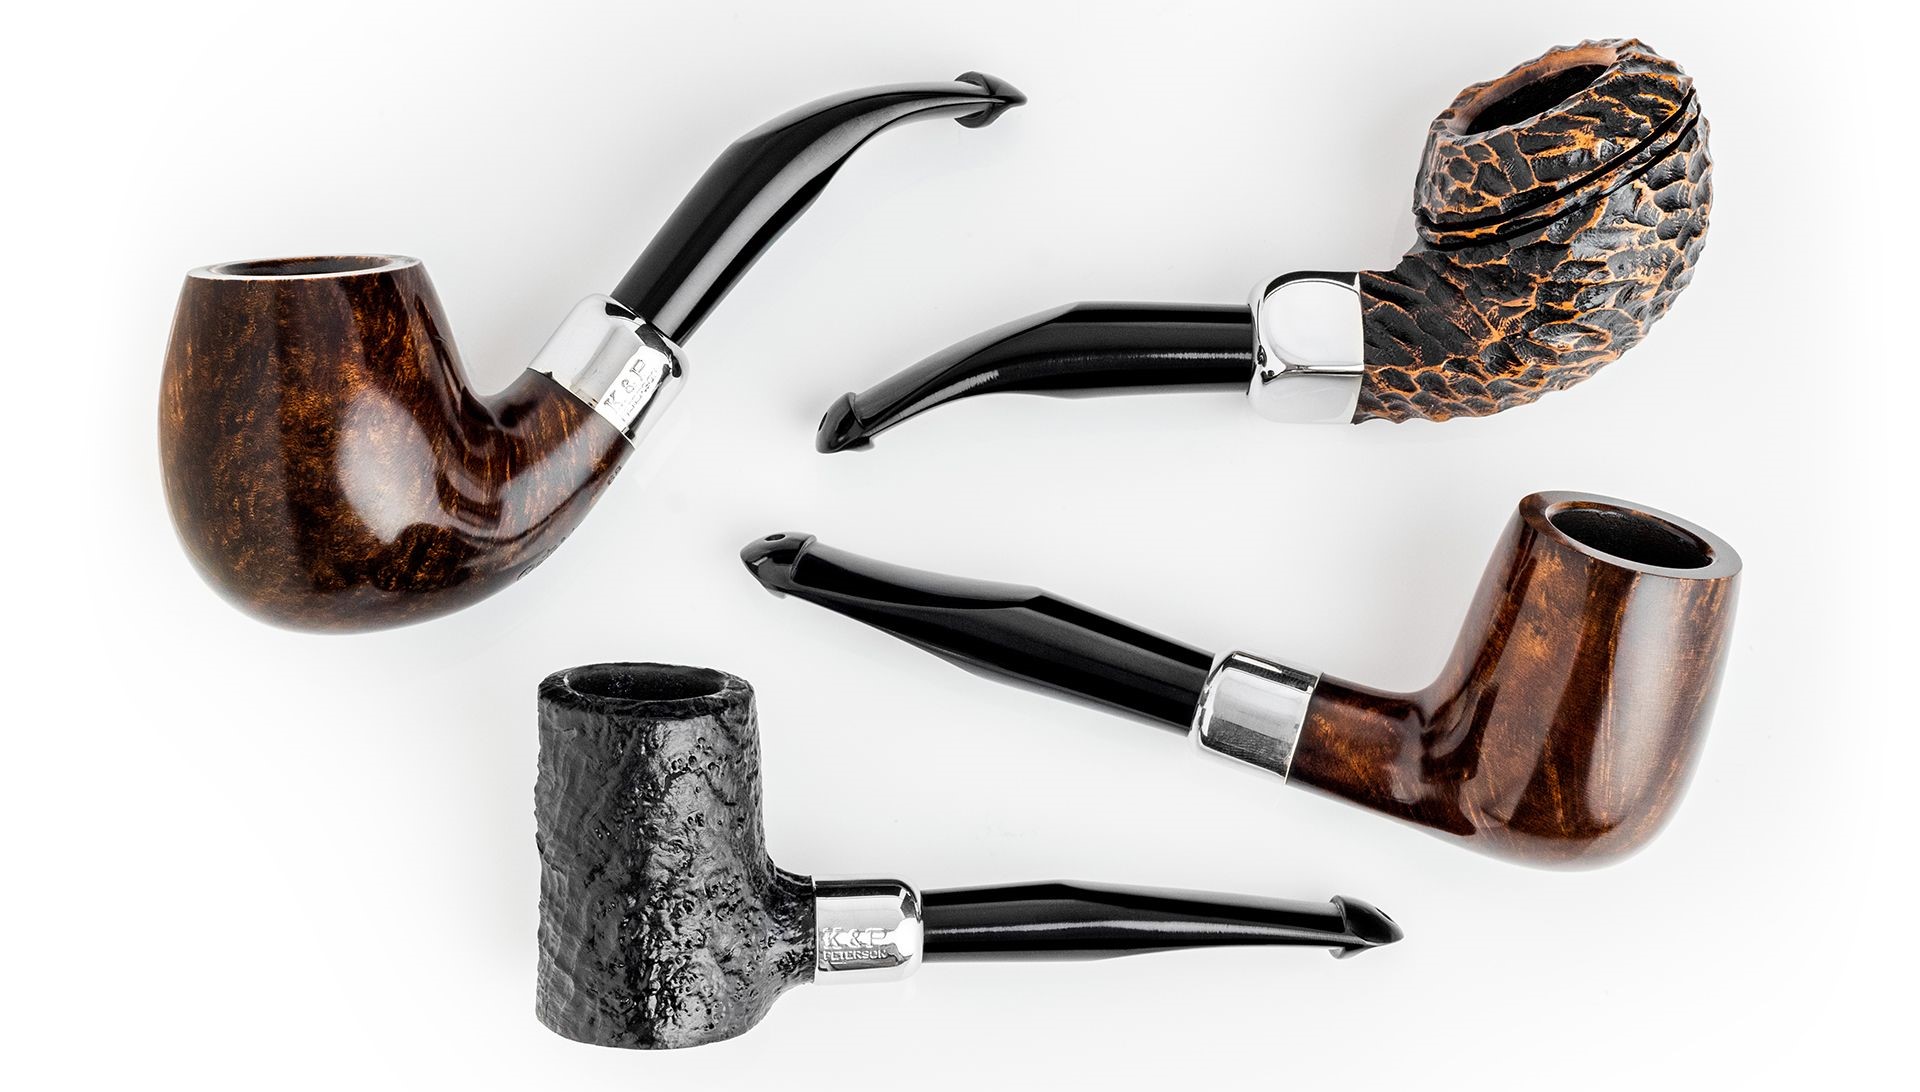 Peterson Short Army tobacco pipes